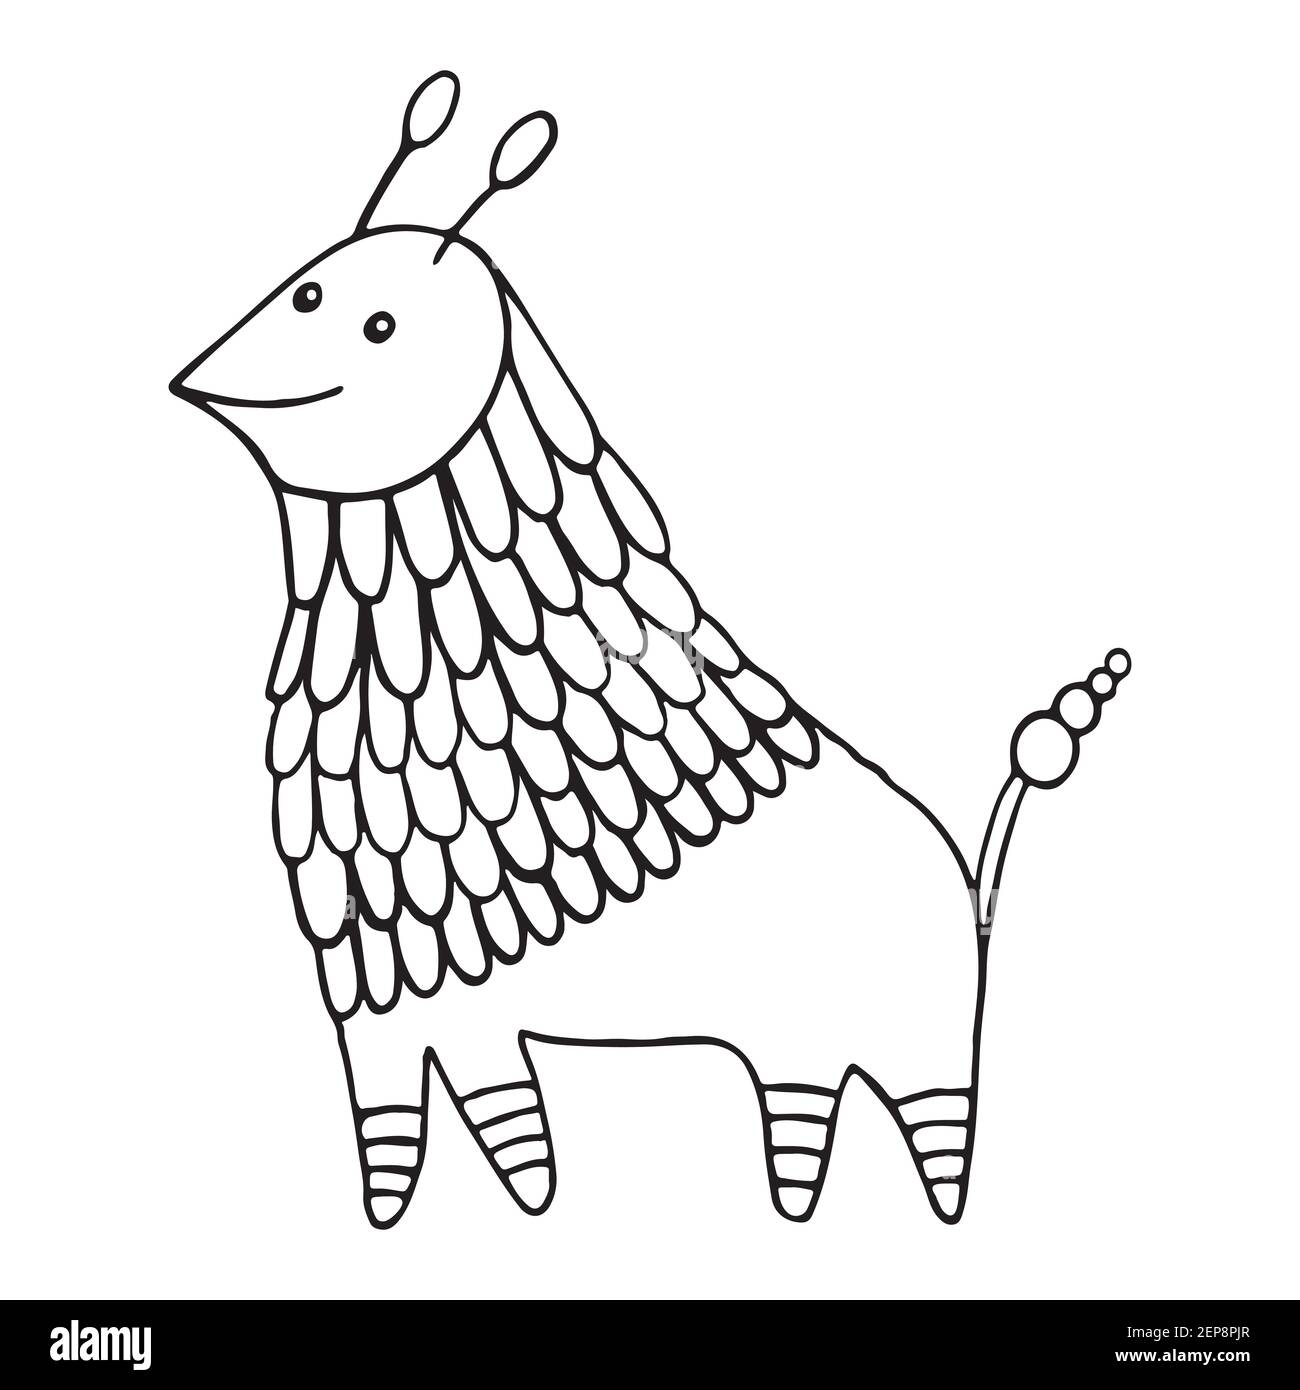 Fantasy animal character decorative coloring page children and adult page. Funny doodle cartoon creature. Vector hand drawn cute alien personge illust Stock Vector